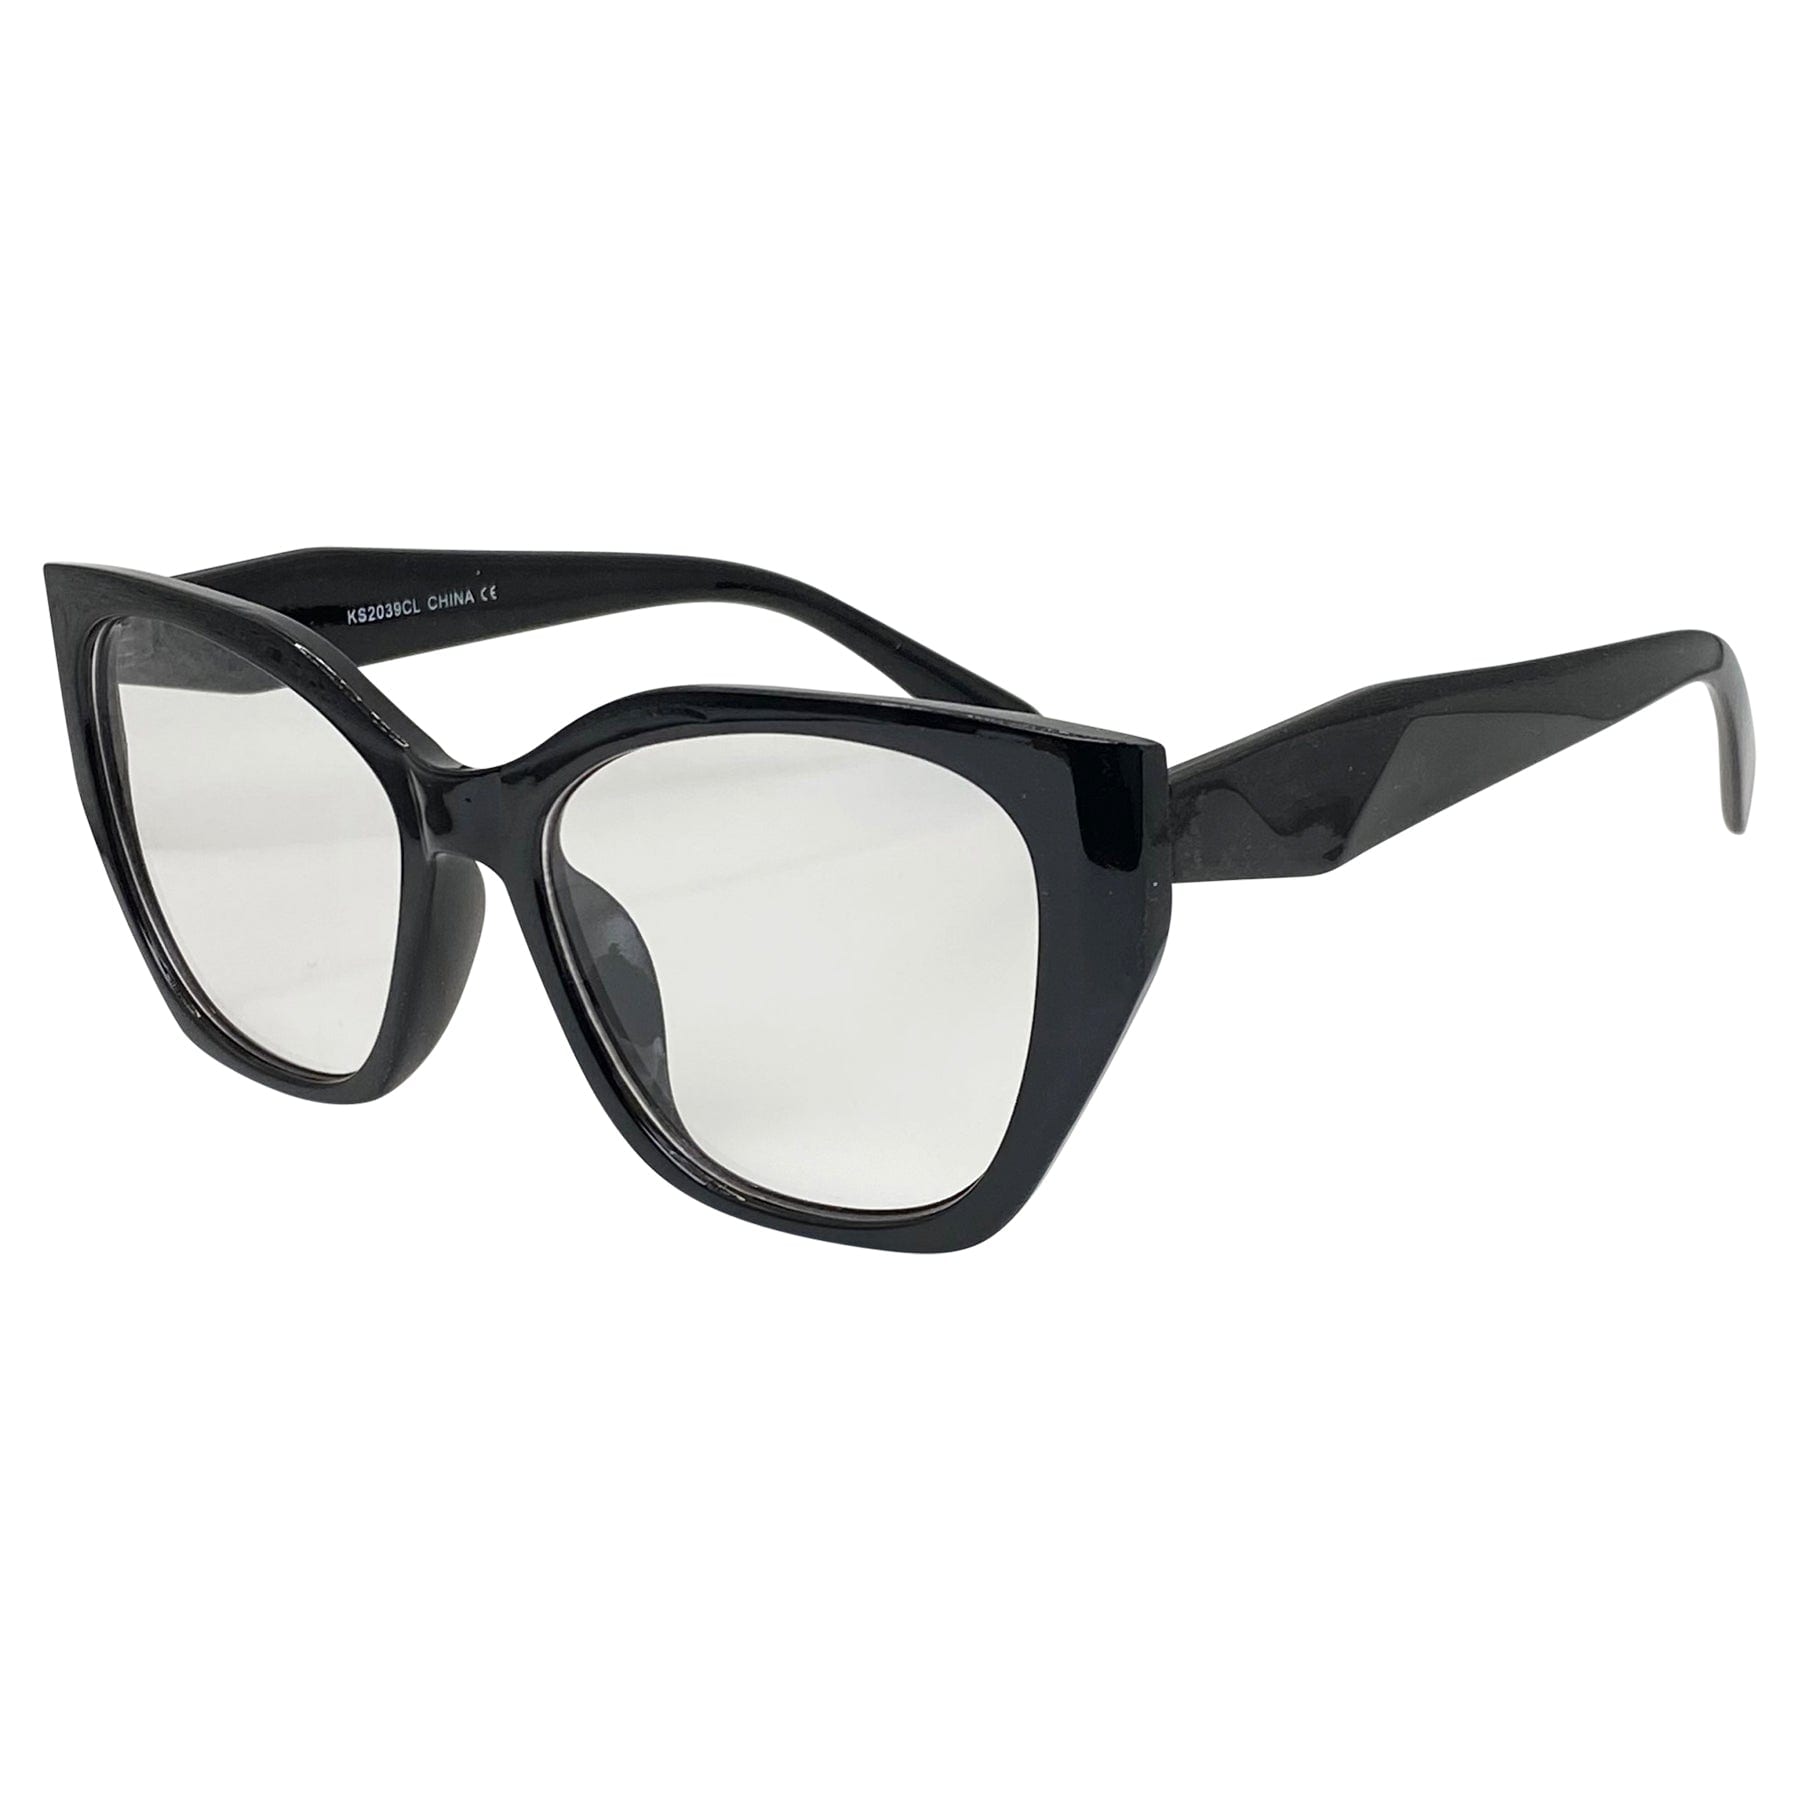 black color glasses with angular cat eye shaped frame and clear lens 